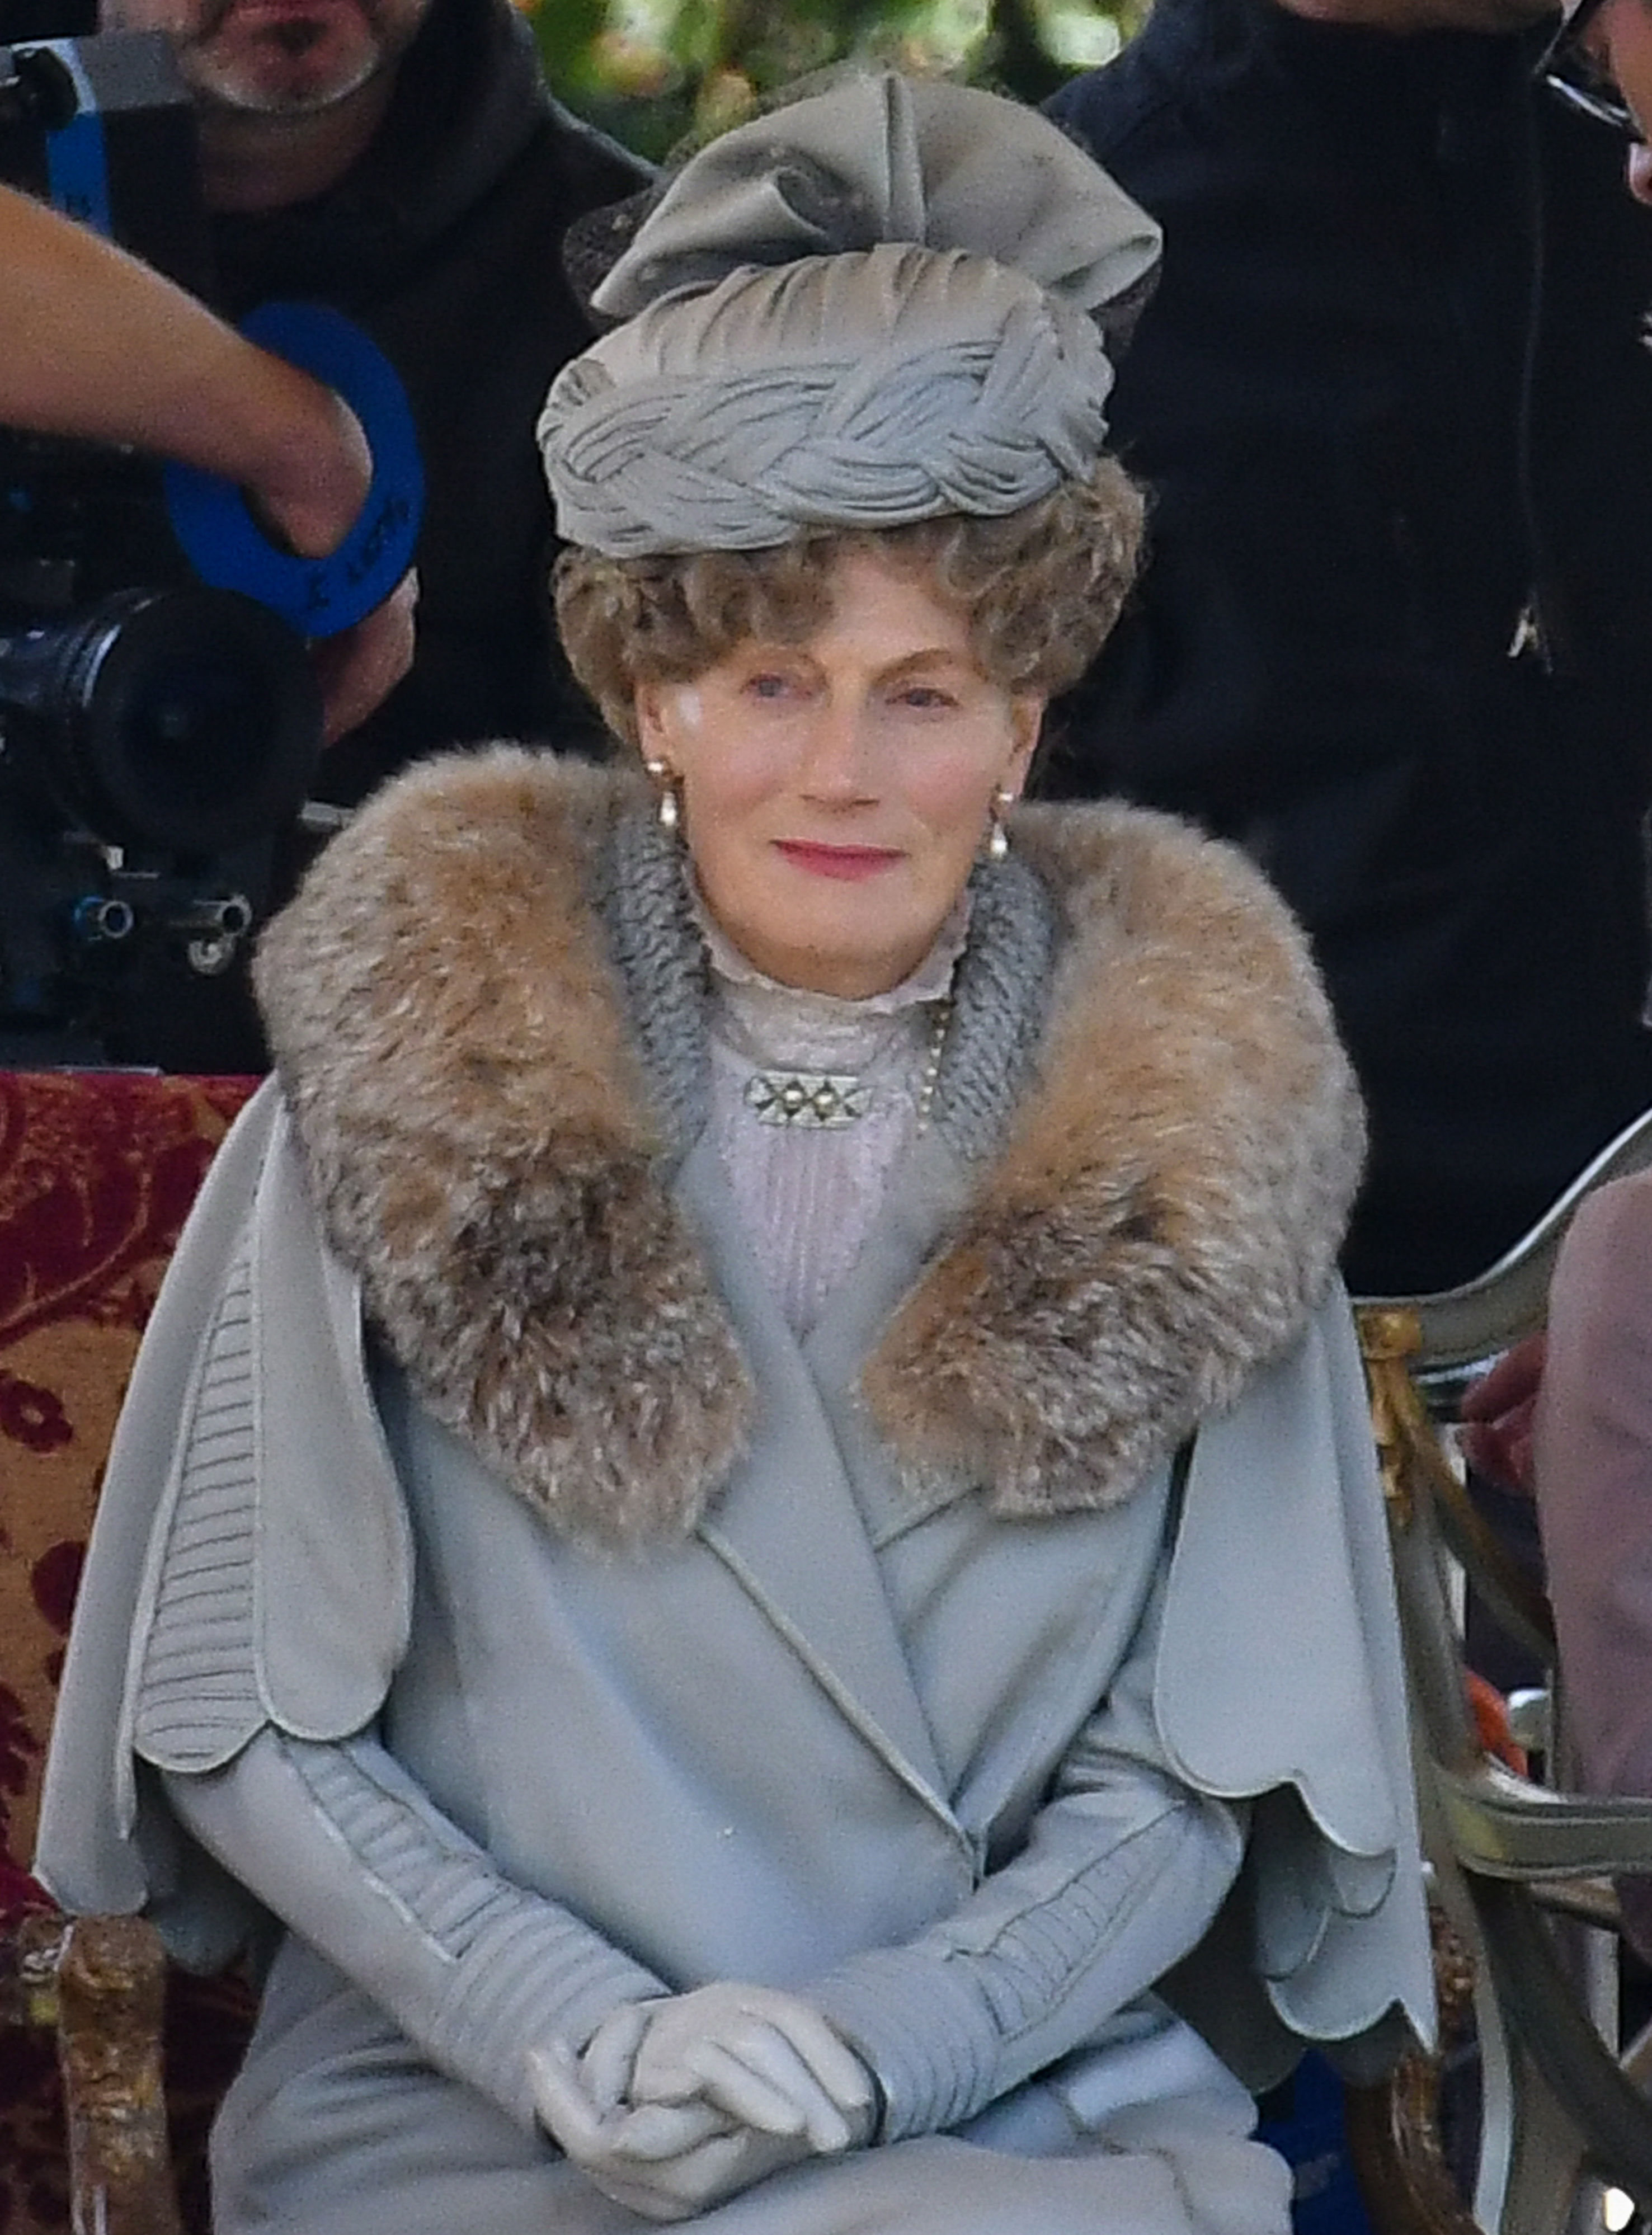 <p>Geraldine James -- seen here during filming in Wiltshire, England, in 2018 -- played Britain's Queen Mary (the current Queen Elizabeth II's grandmother) in the "Downton Abbey" movie. The film's costume designer told <a href="https://ew.com/movies/2019/09/13/downton-abbey-movie-costumes/">Entertainment Weekly</a> that she worked with John Bright at London's Cosprop, which specializes in the hire and making-to-hire of period costume for professional stage, TV and film productions, on the movie and that he really delivered when it came to the monarch's wife. "John has some pieces of Queen Mary's actual wardrobe in his archives that we were able to analyze to look at the construction and detail," Anna Mary Scott Robbins told EW, adding that one of the dresses crafted for Geraldine was made with fabric once worn by the real royal.</p>